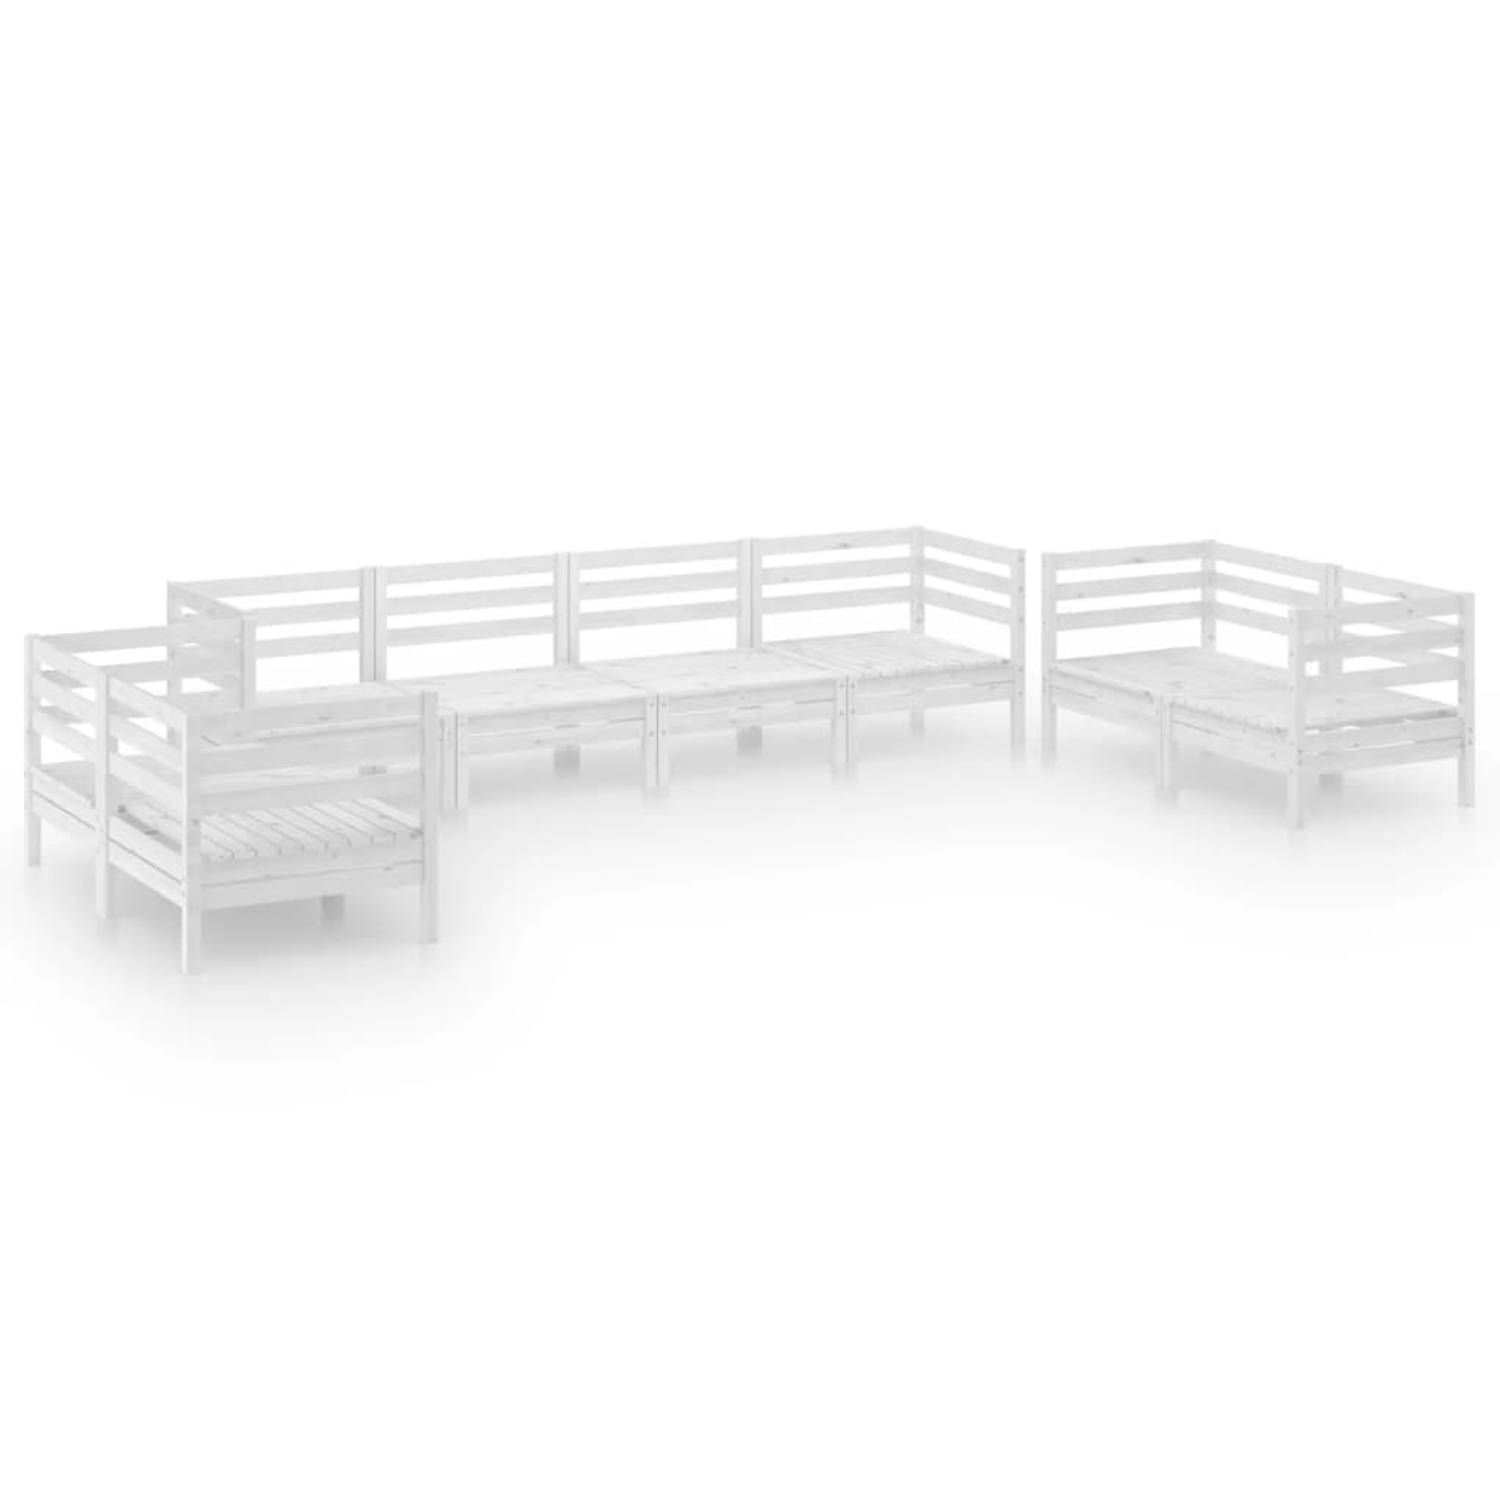 The Living Store Loungeset Grenenhout - Wit - 63.5 x 63.5 x 62.5 cm - Modulair